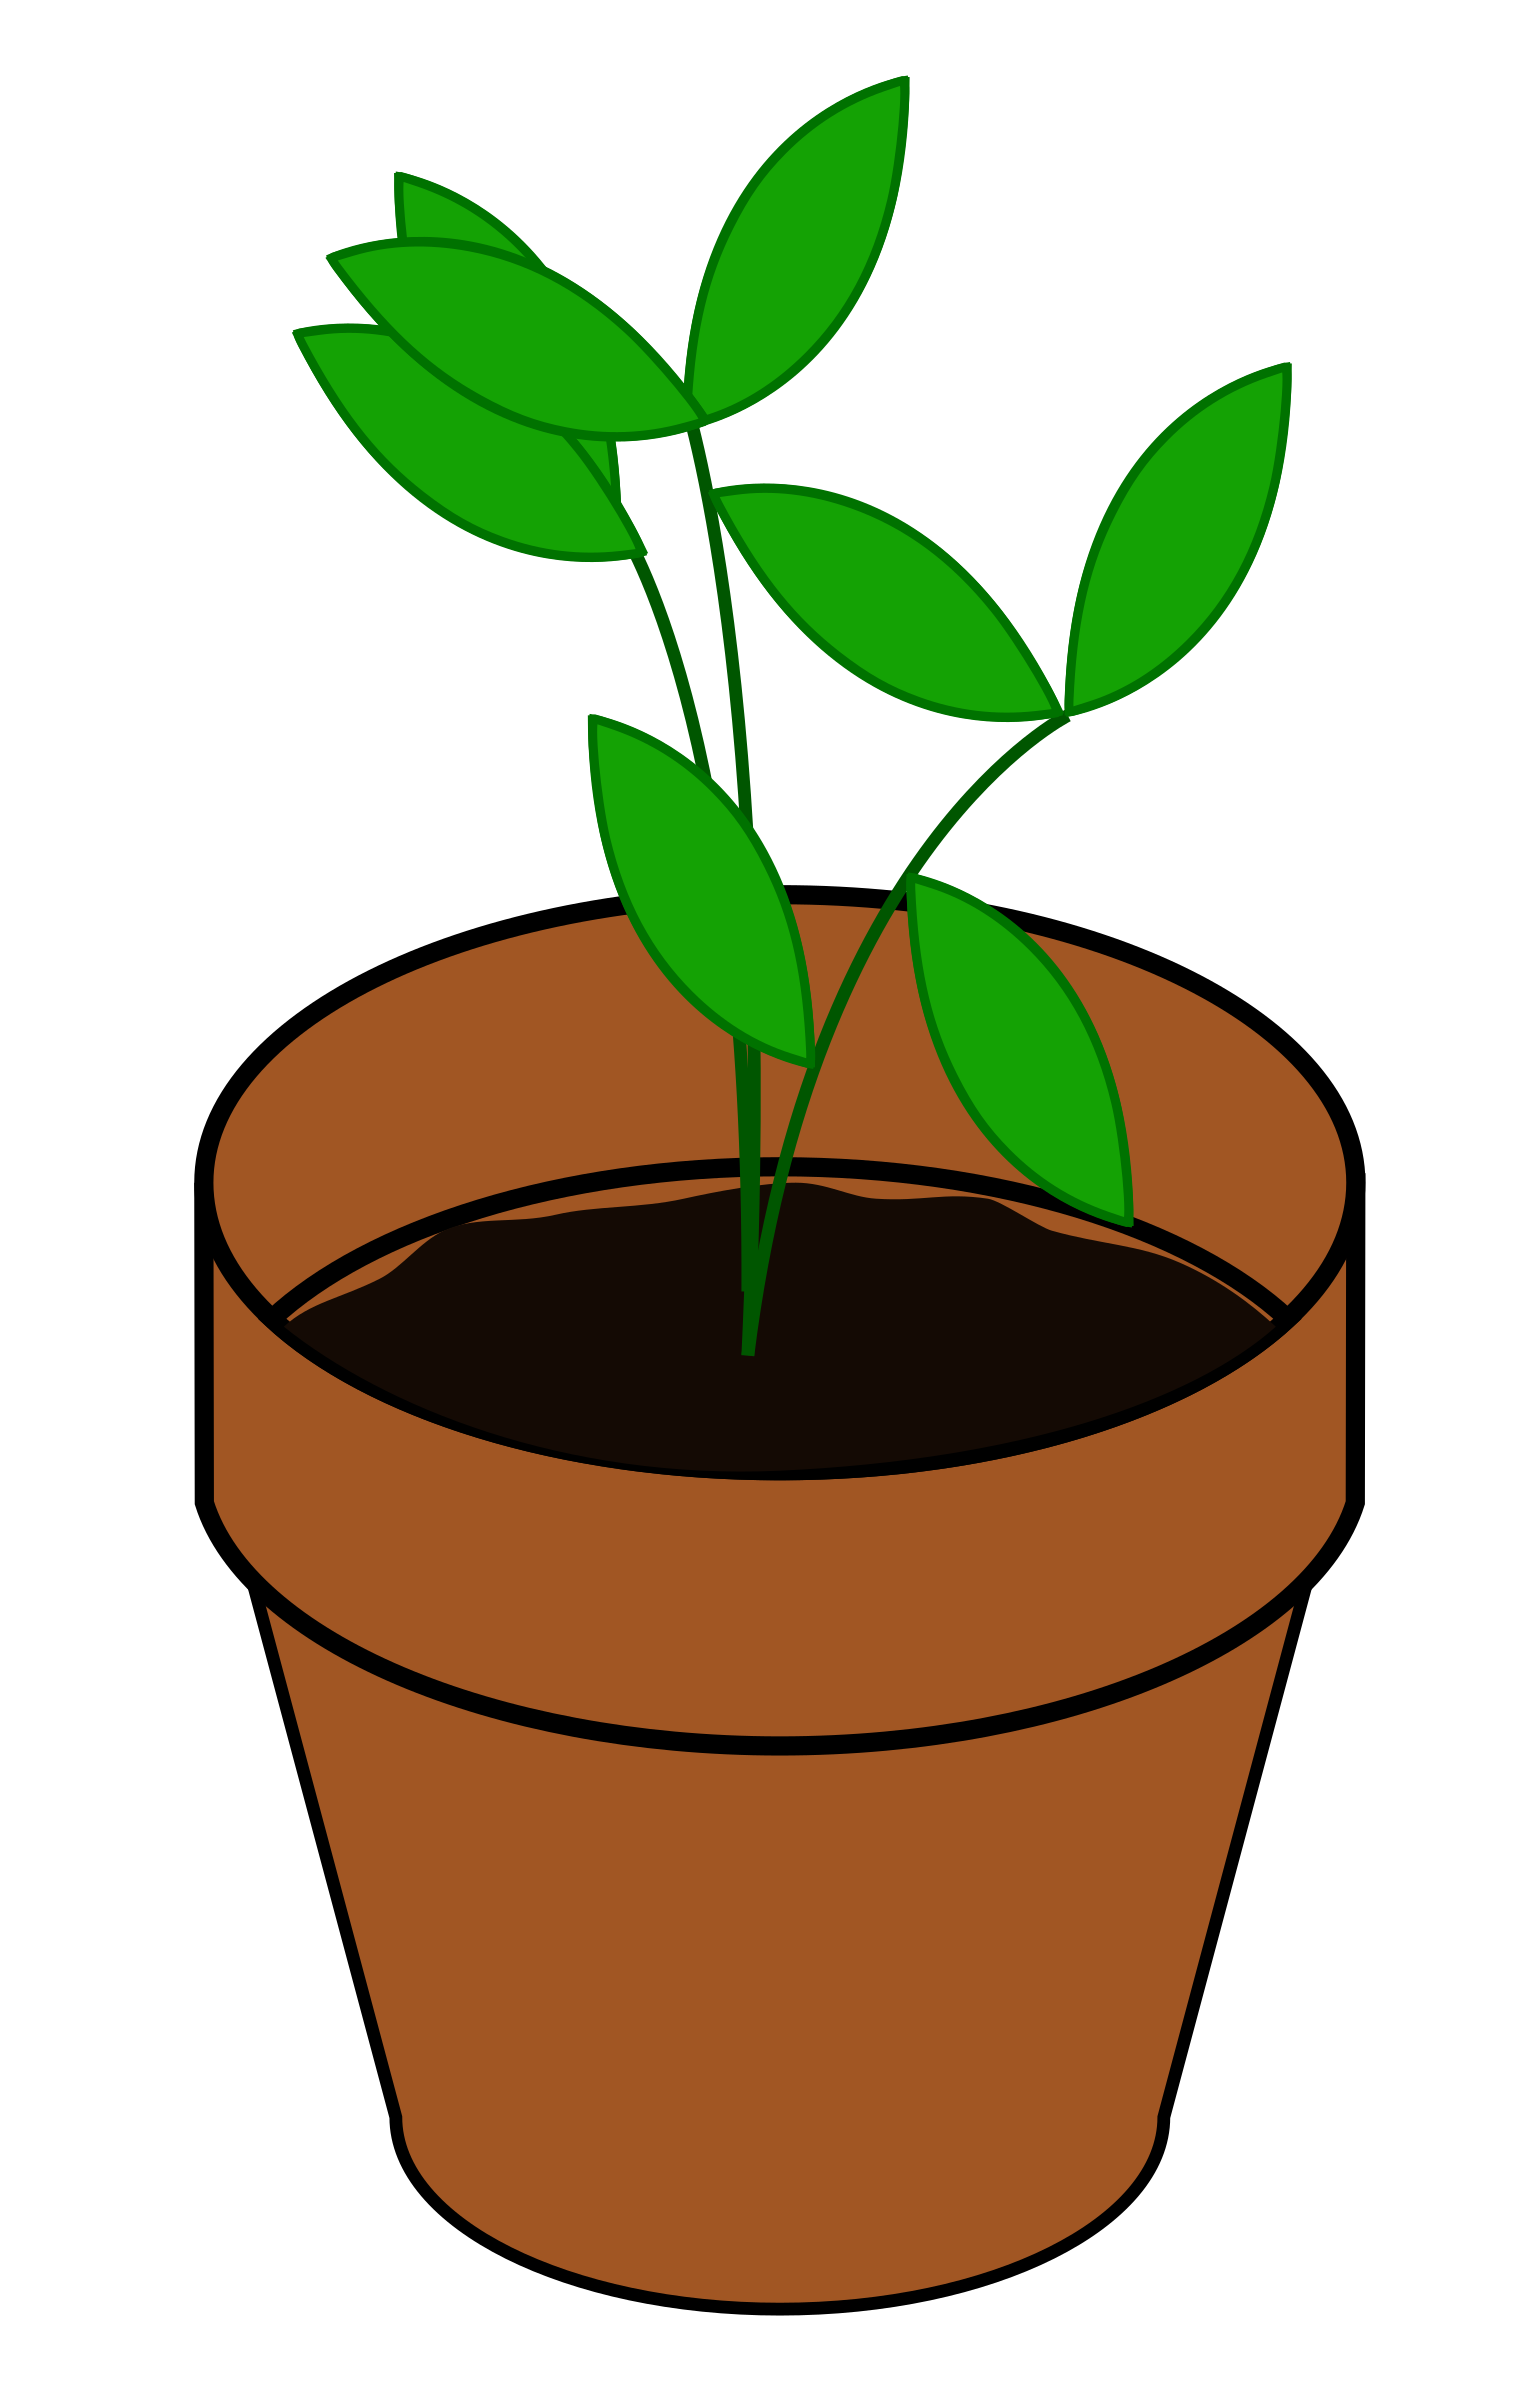 Big Image (Png) - Soil In A Pot, Transparent background PNG HD thumbnail